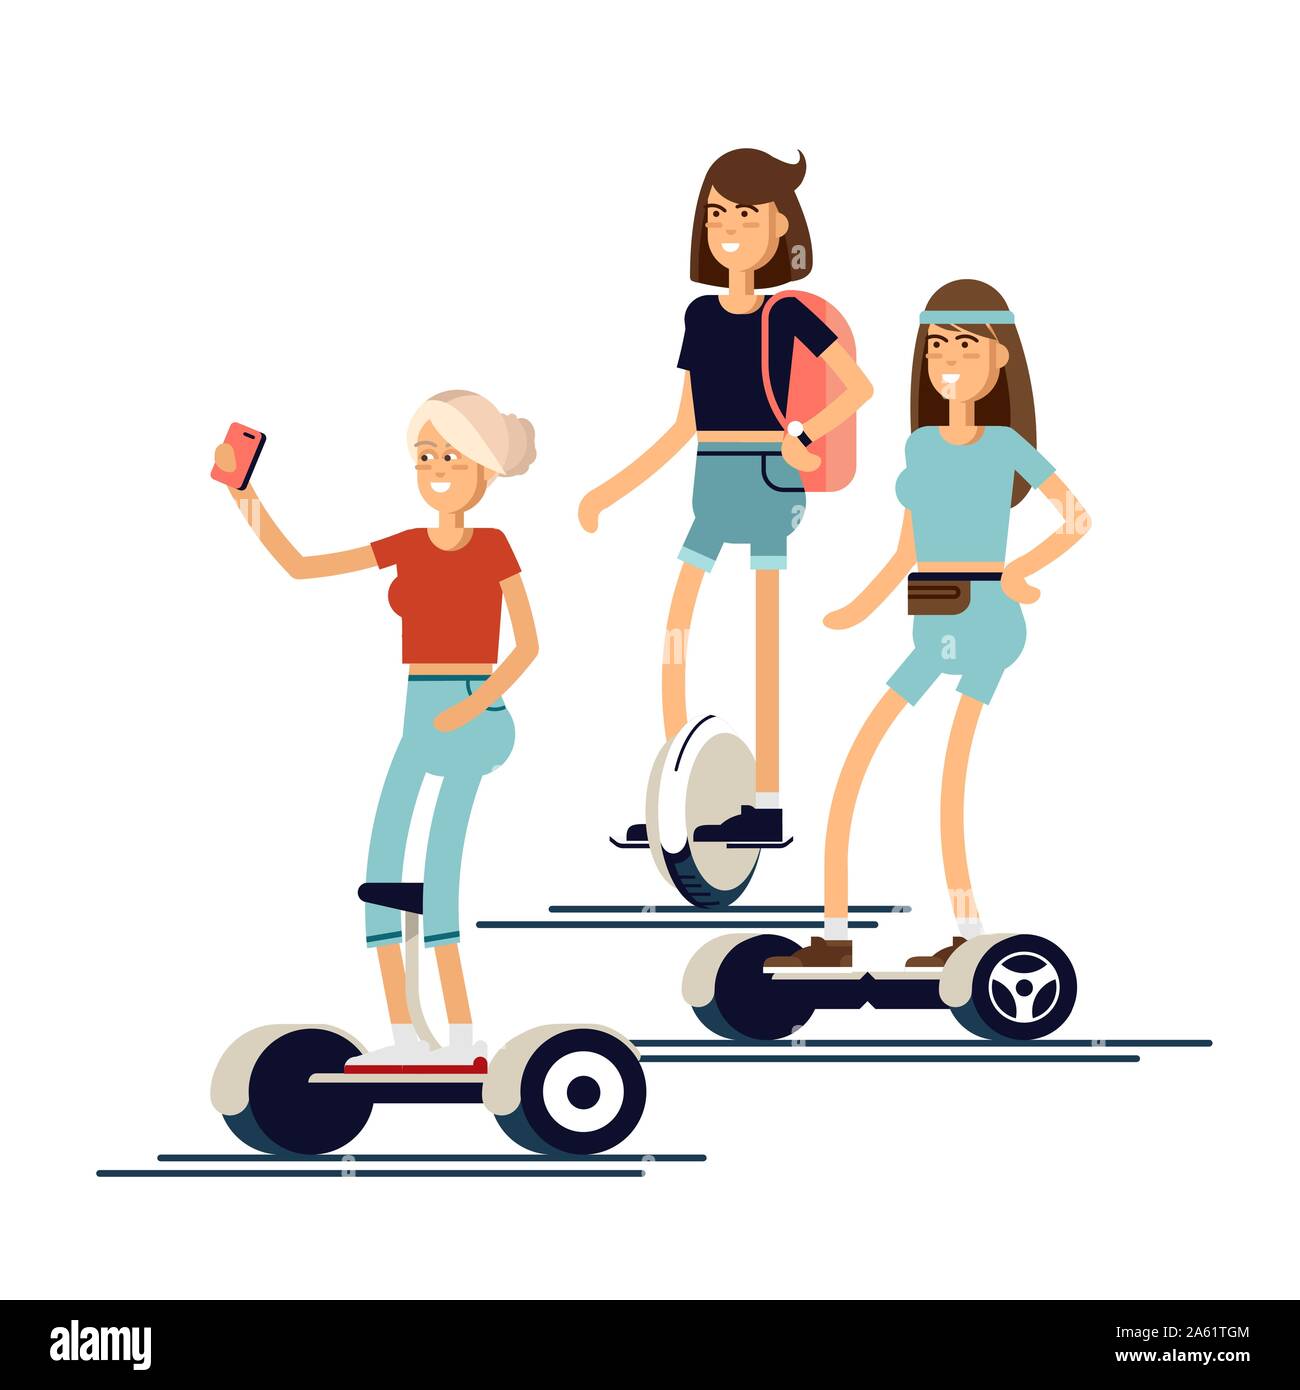 https://c8.alamy.com/comp/2A61TGM/set-of-active-young-woman-with-electric-scooter-on-new-modern-technology-hoverboard-girl-self-balance-wheel-transport-gyroscooter-ride-the-street-ve-2A61TGM.jpg